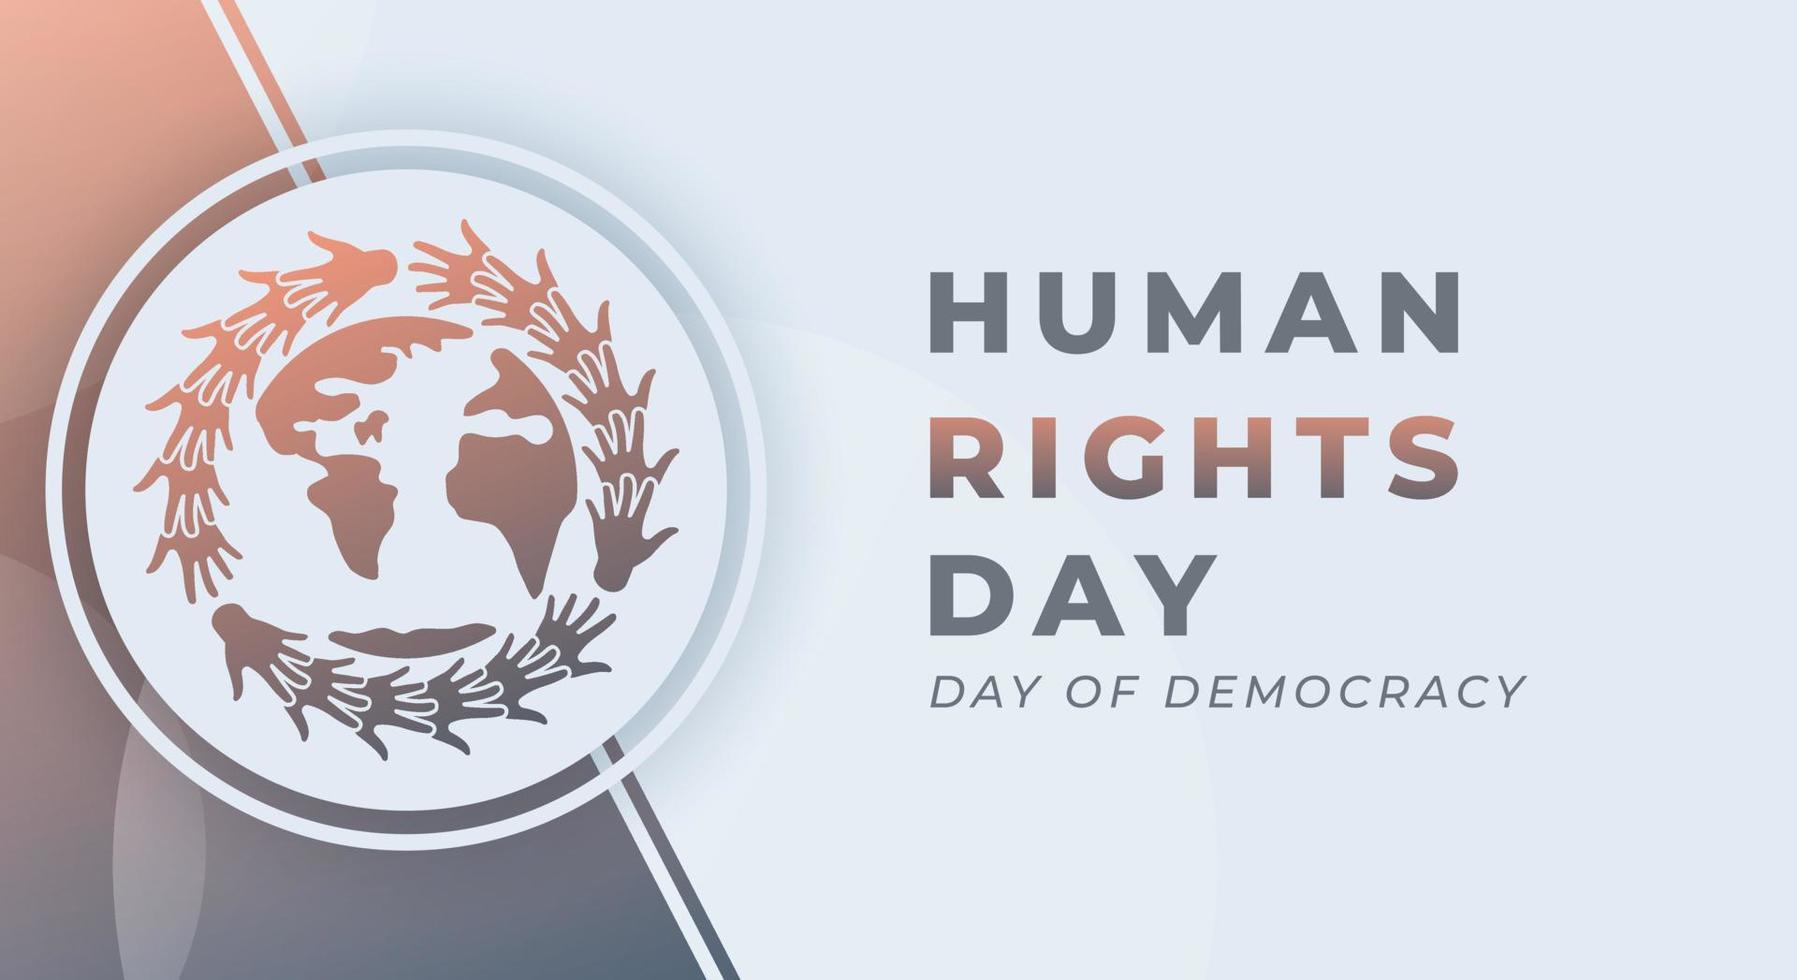 Happy Human Rights Day December Celebration Vector Design Illustration. Template for Background, Poster, Banner, Advertising, Greeting Card or Print Design Element